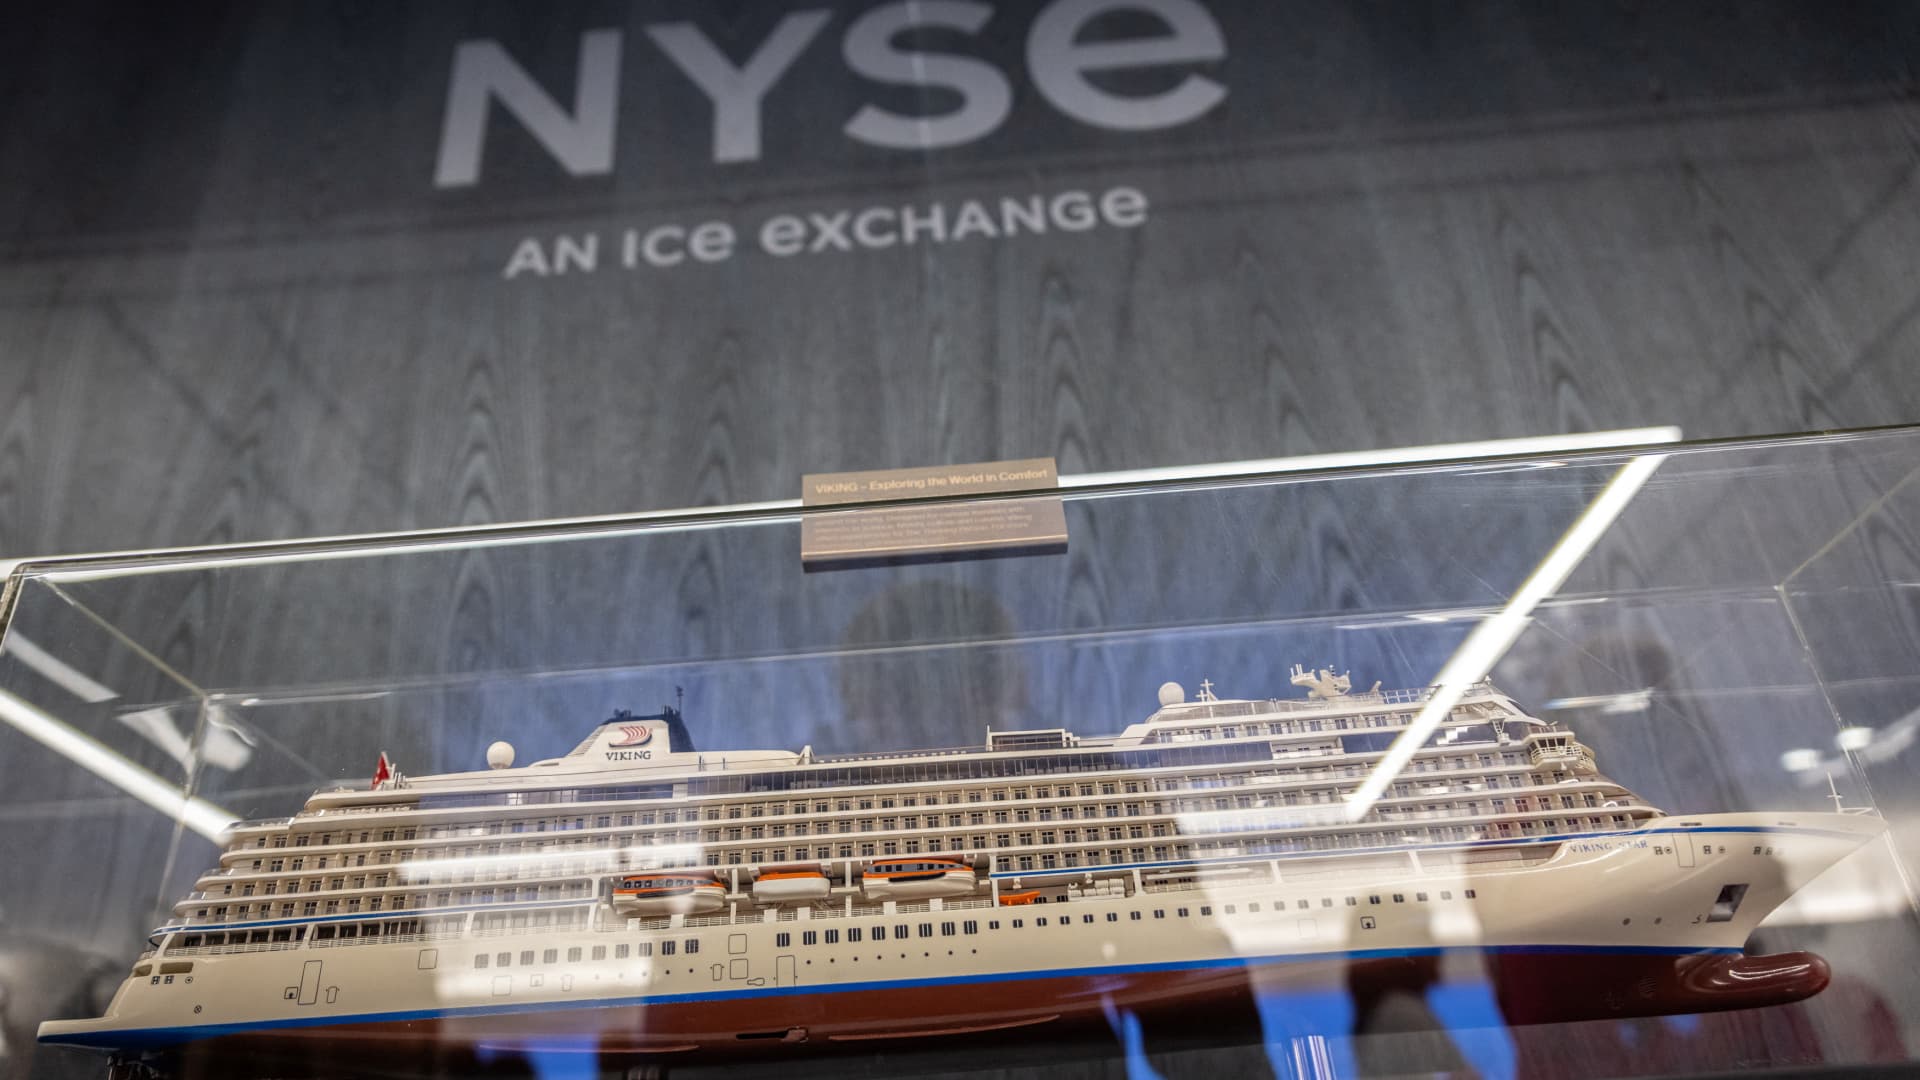 A model of a Viking cruise ship is displayed at the New York Stock Exchange.